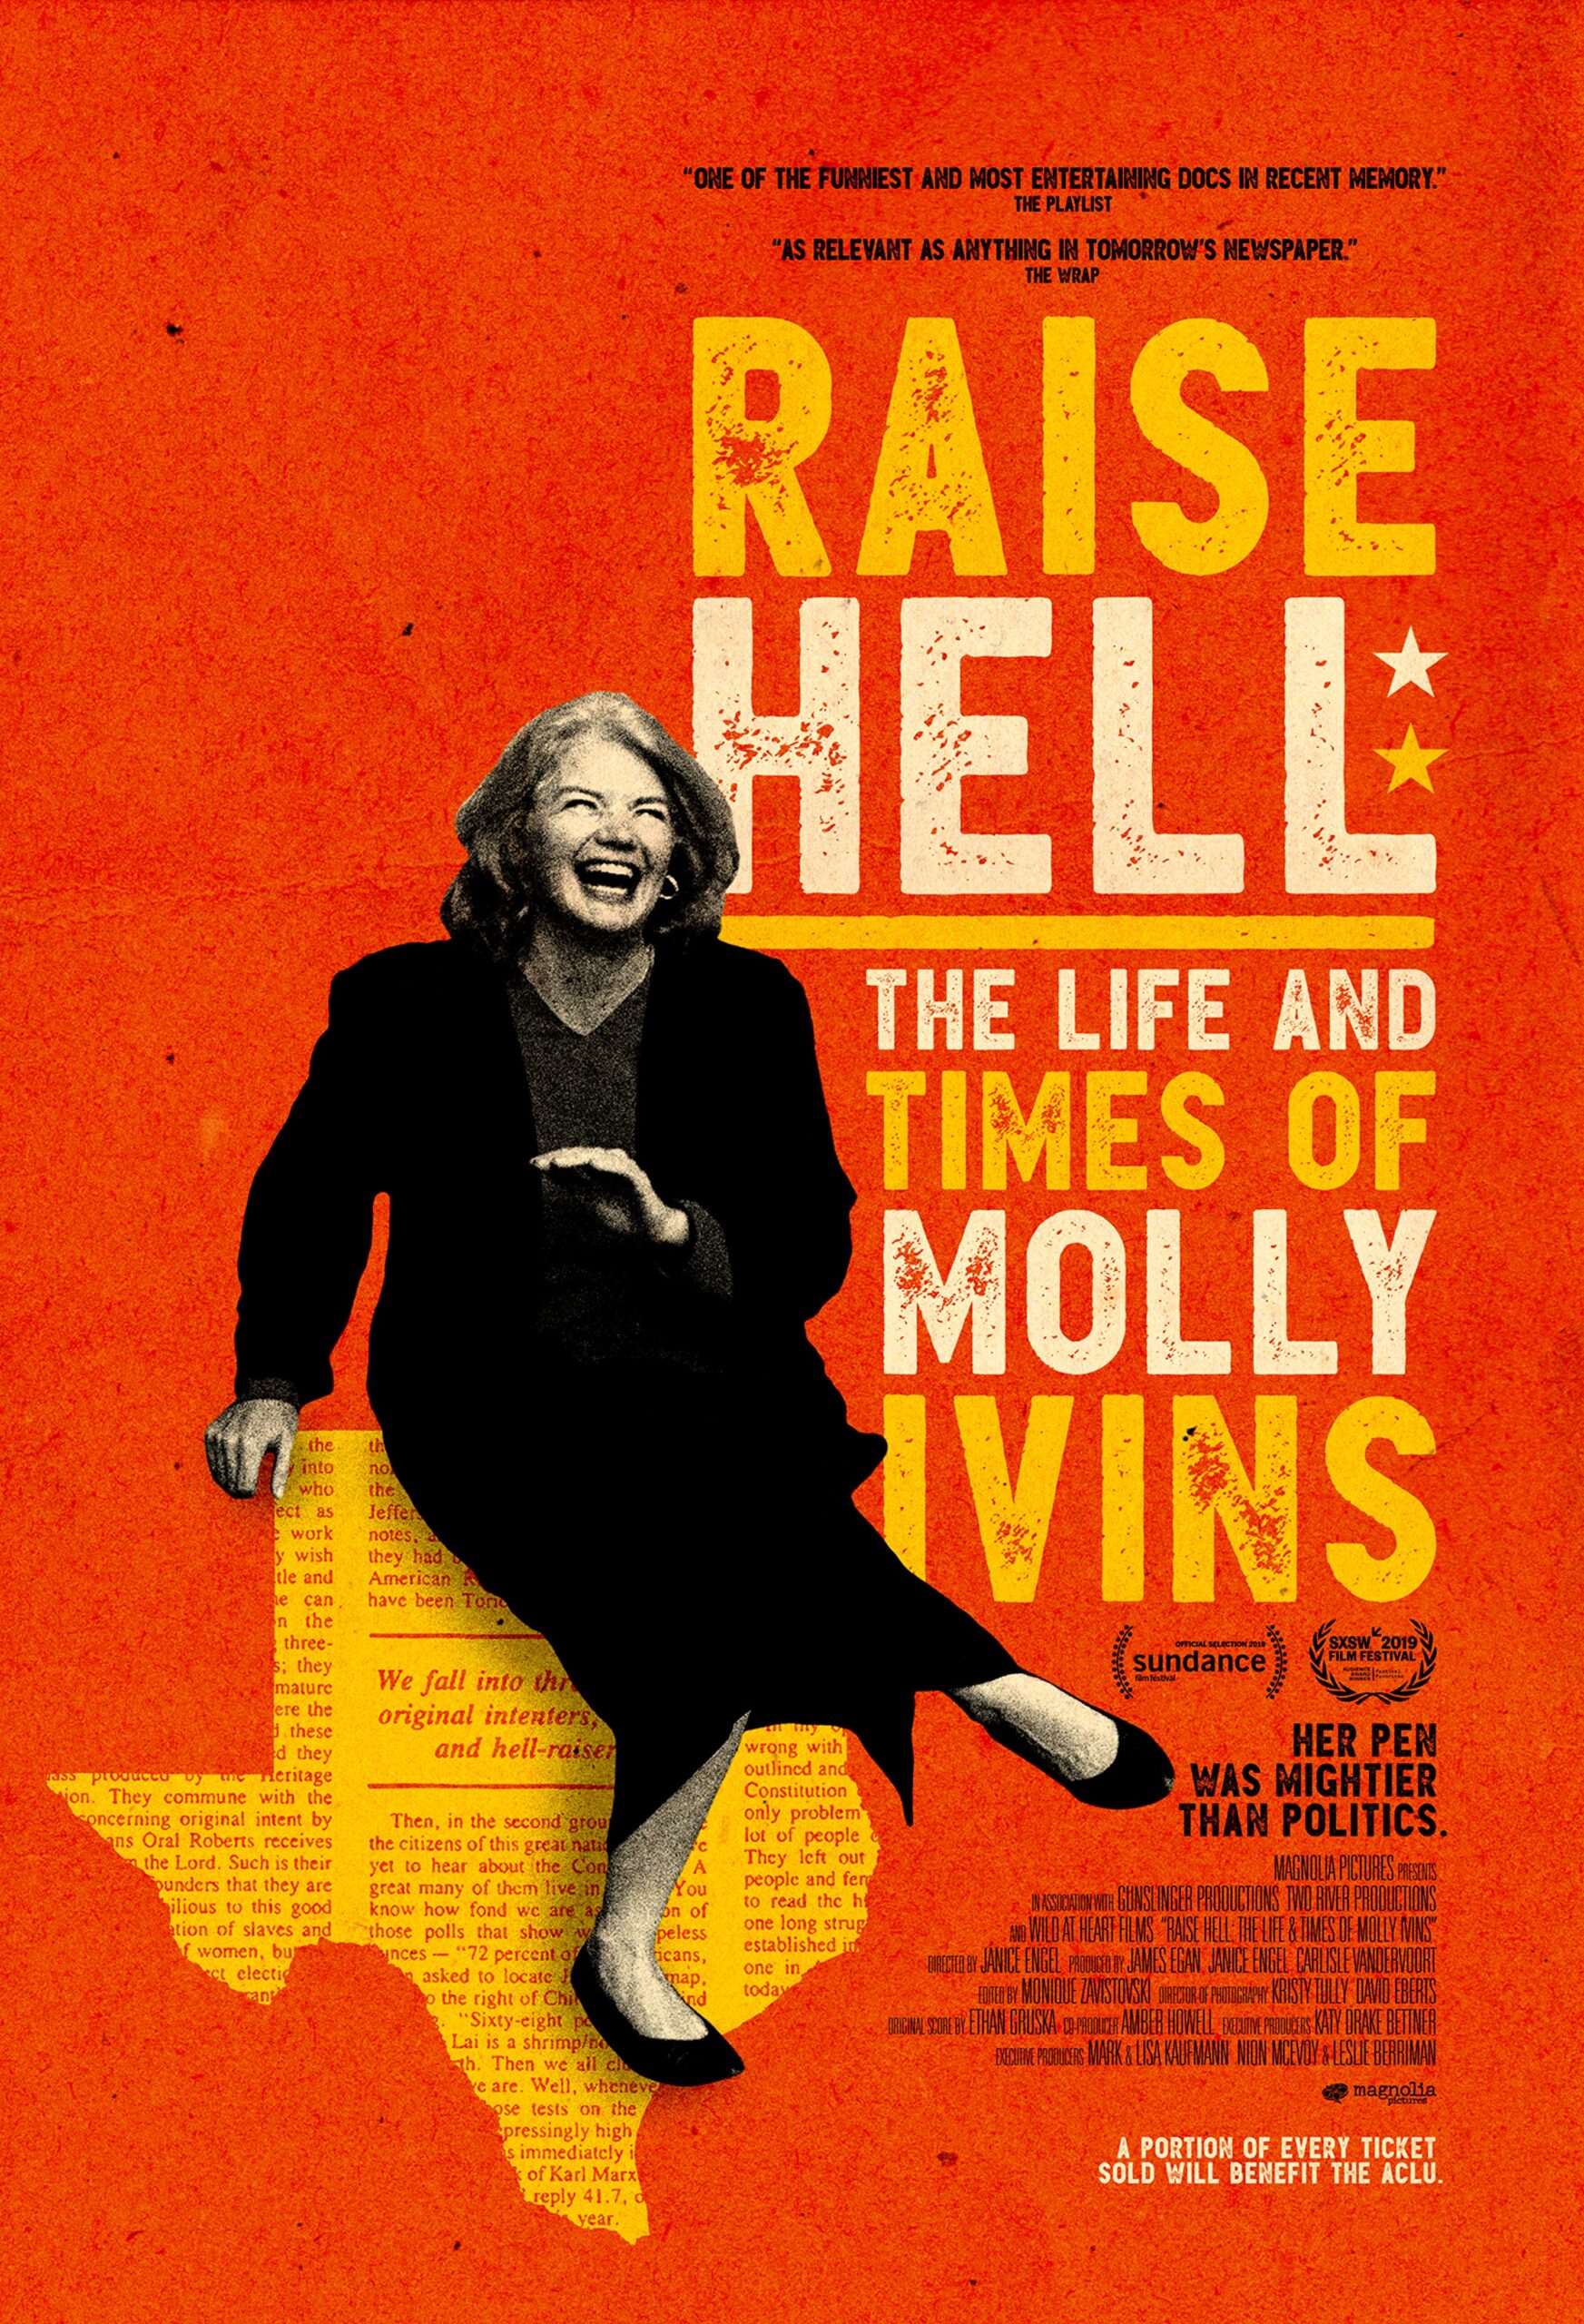 The Life and Times of Molly Ivins